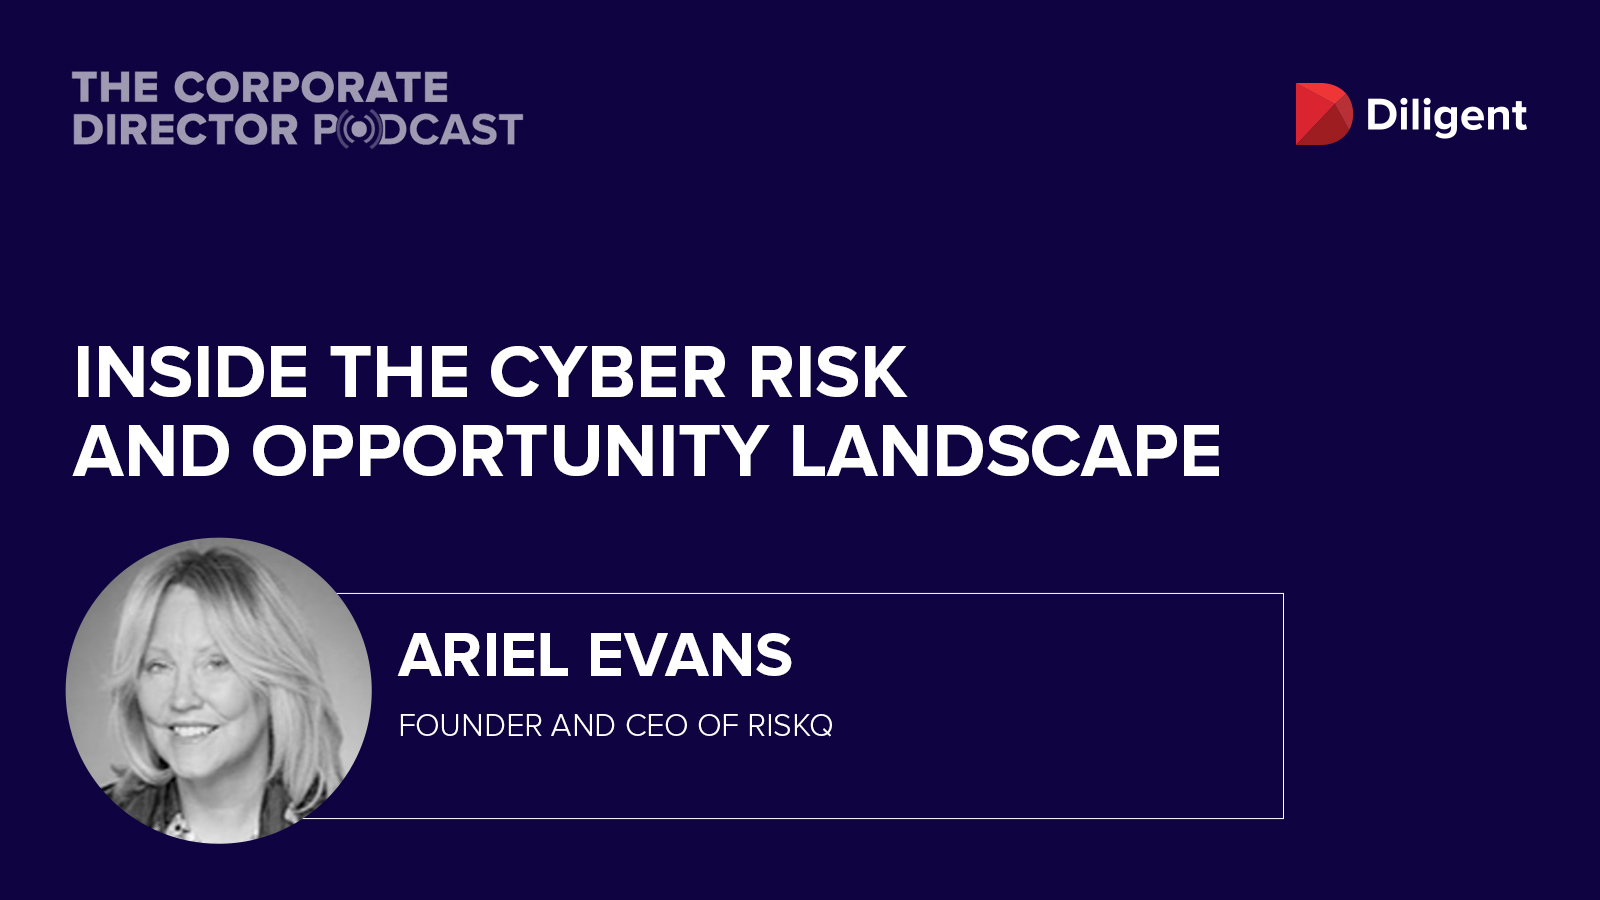 Diligent Corporate Director Podcast Insight the Cyber Risk and Opportunity Landscape